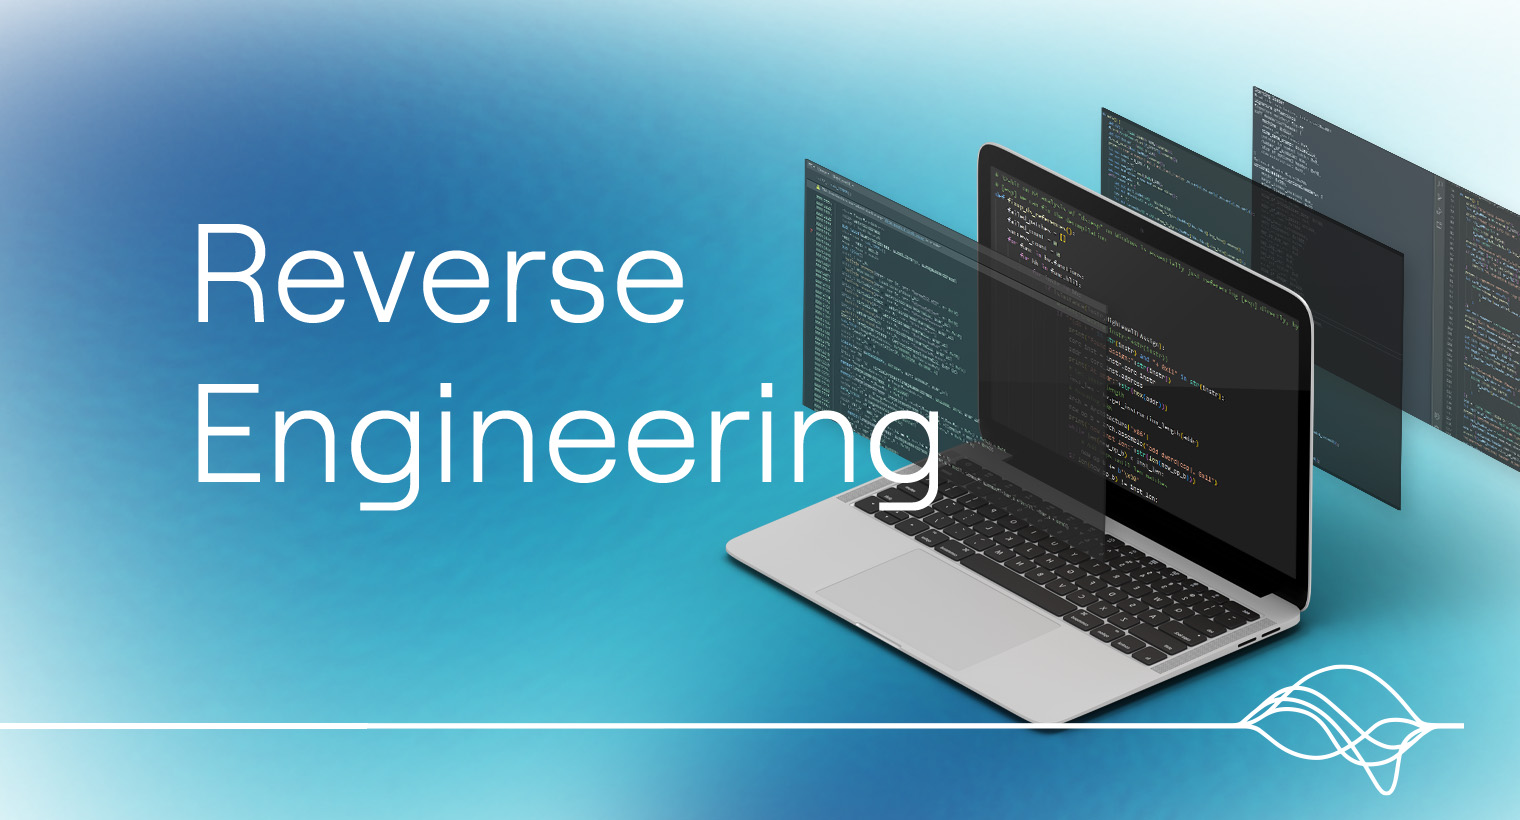 Reverse Engineering | Signal Labs | Advanced Offensive Cybersecurity Training | Self-Paced Trainings | Live Trainings | Virtual Trainings | Custom Private Trainings for Business